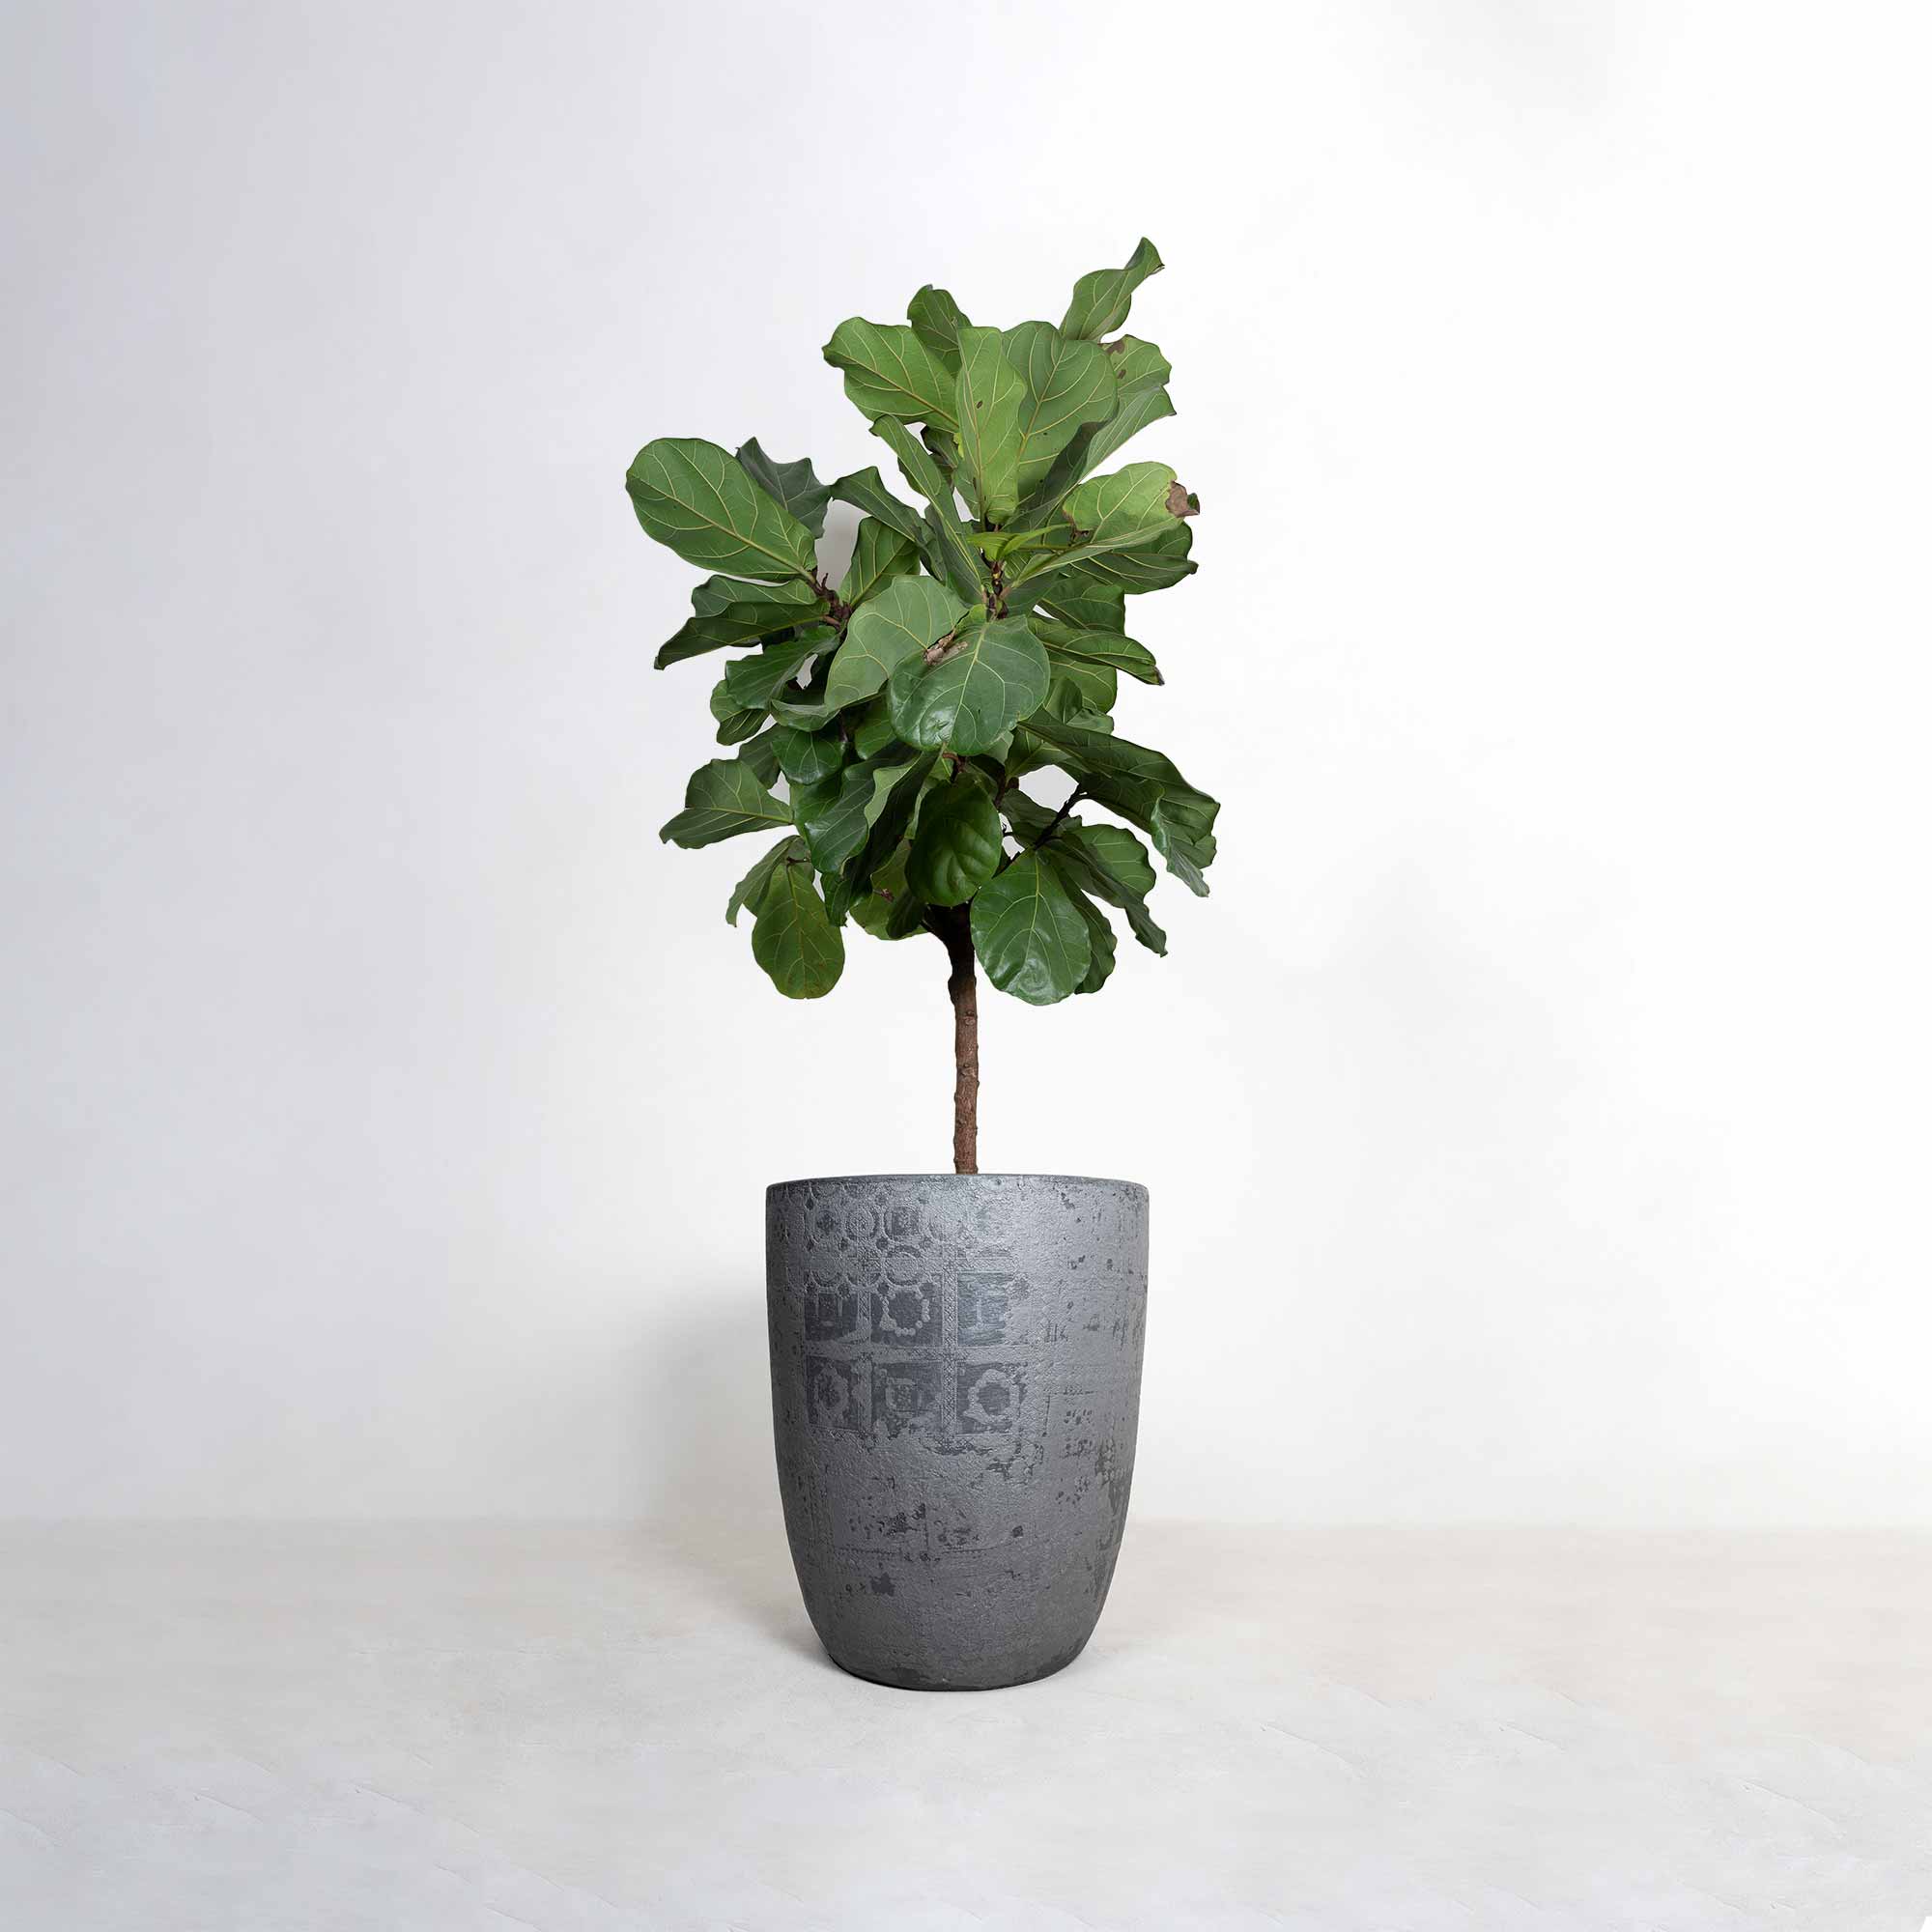 Pot 1 with plant